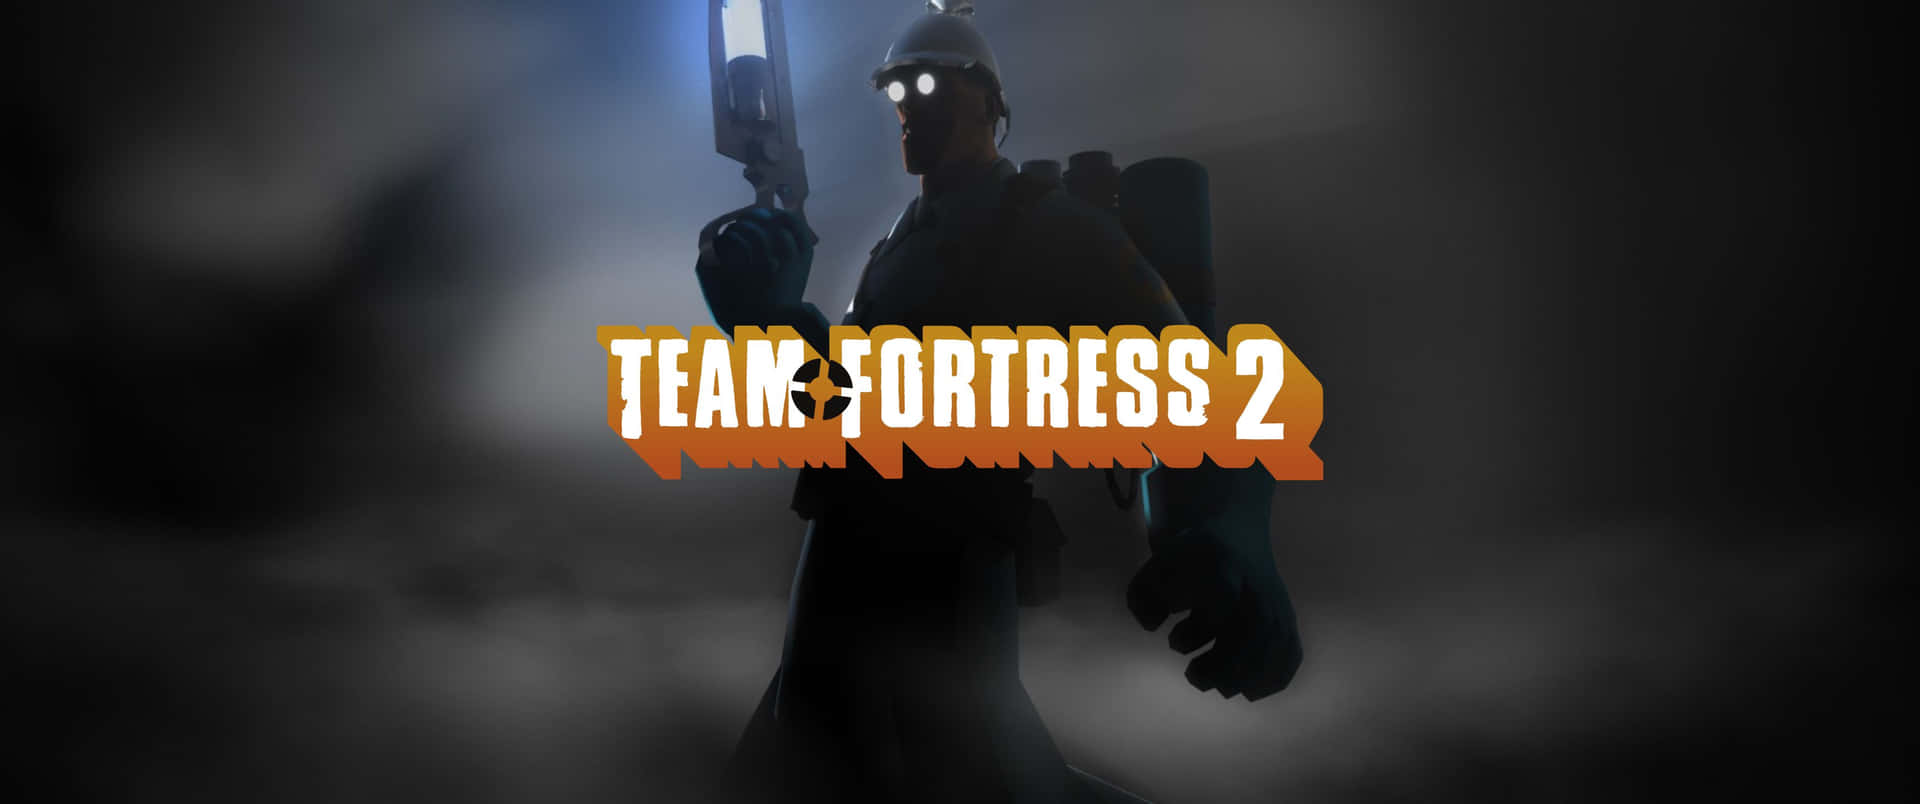 Team Fortress 2 game logo with colorful background